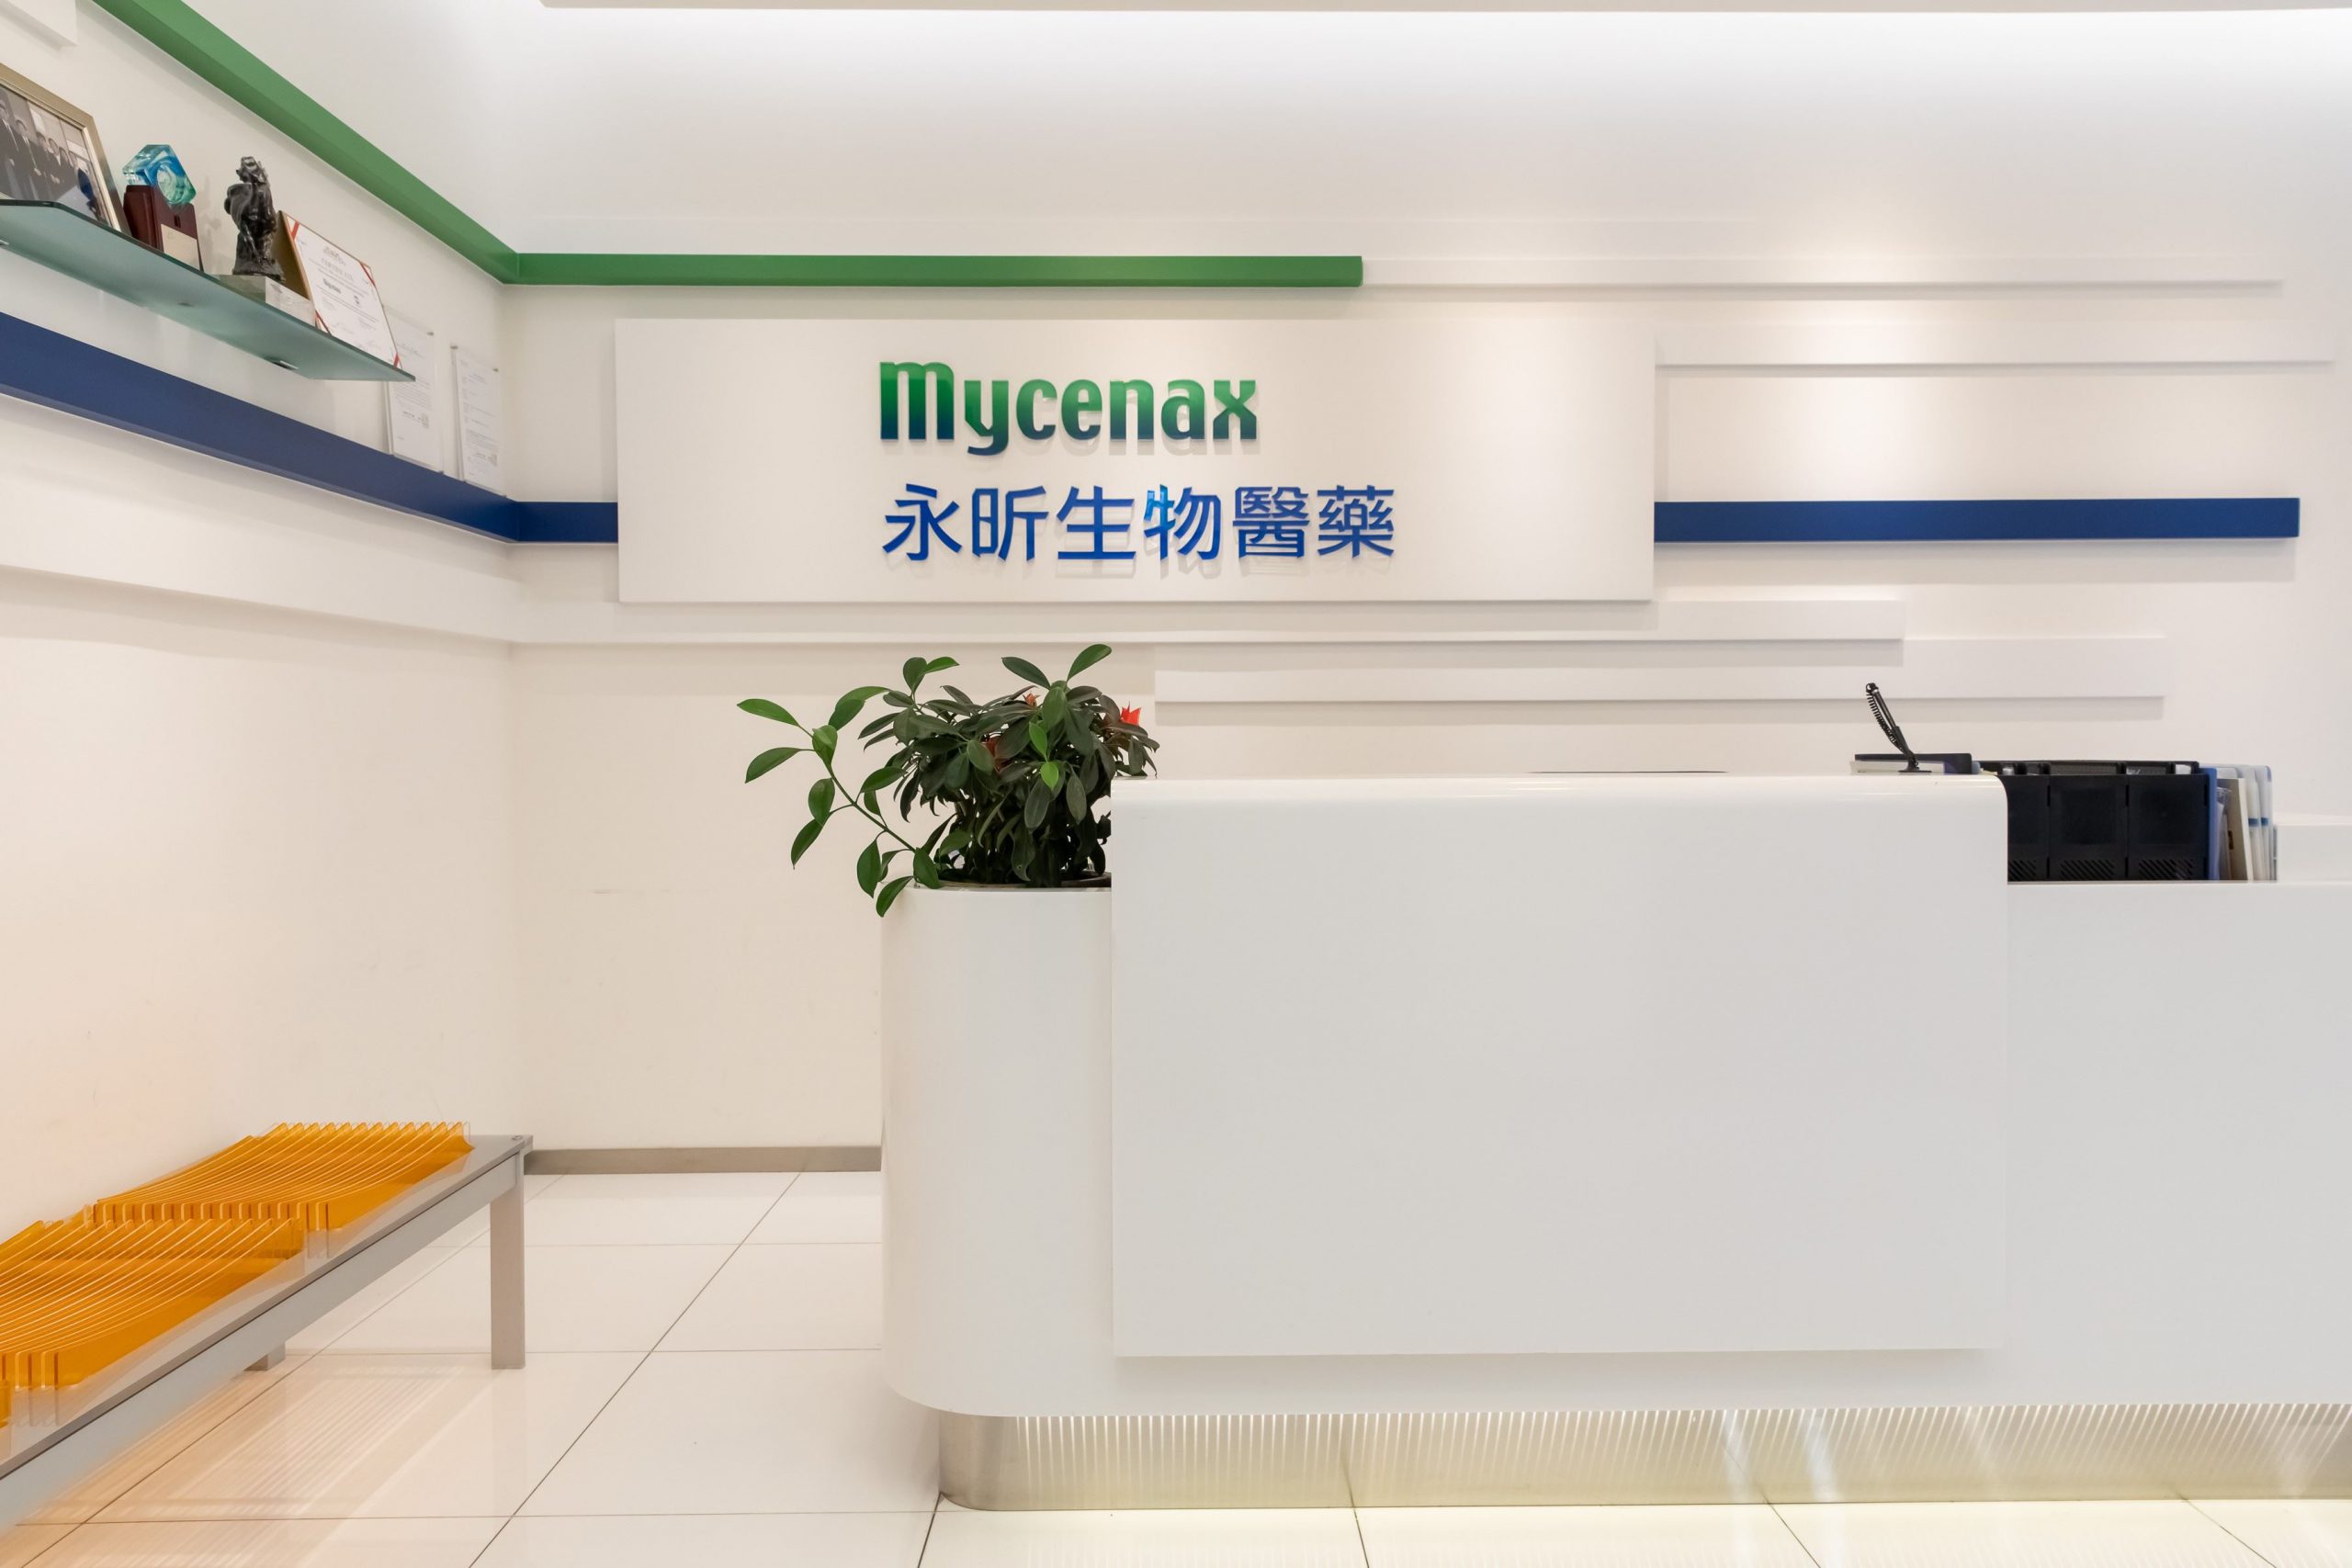 Mycenax Signs an Agreement with Gedeon Richter for LusiNEX